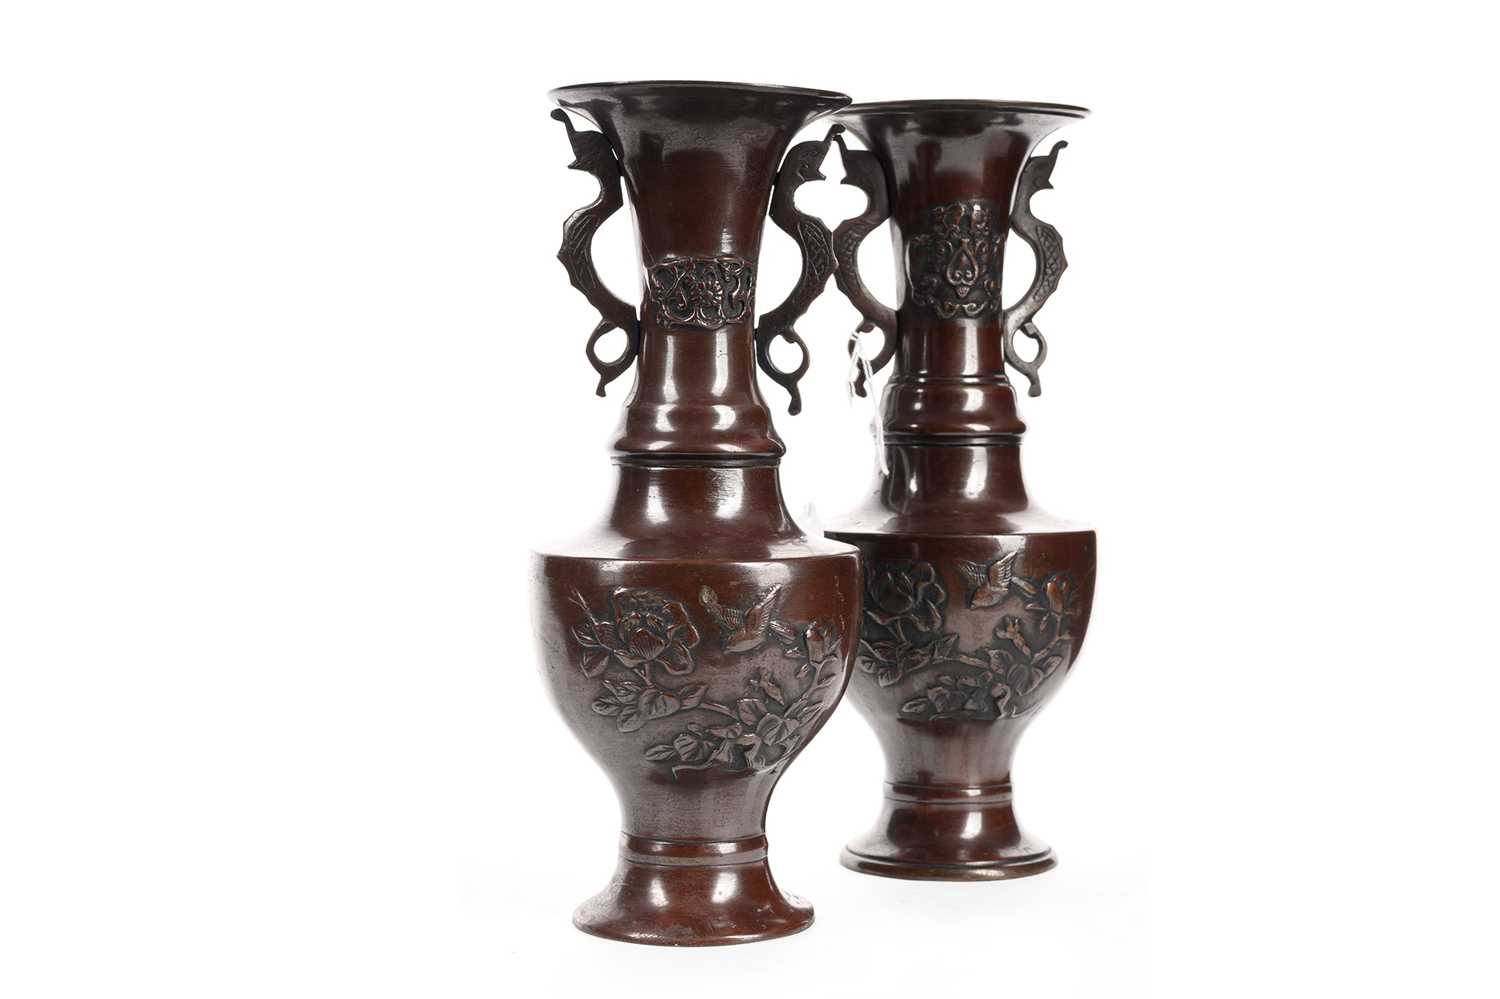 PAIR OF JAPANESE BRONZE VASES, LATE 19TH/EARLY 20TH CENTURY